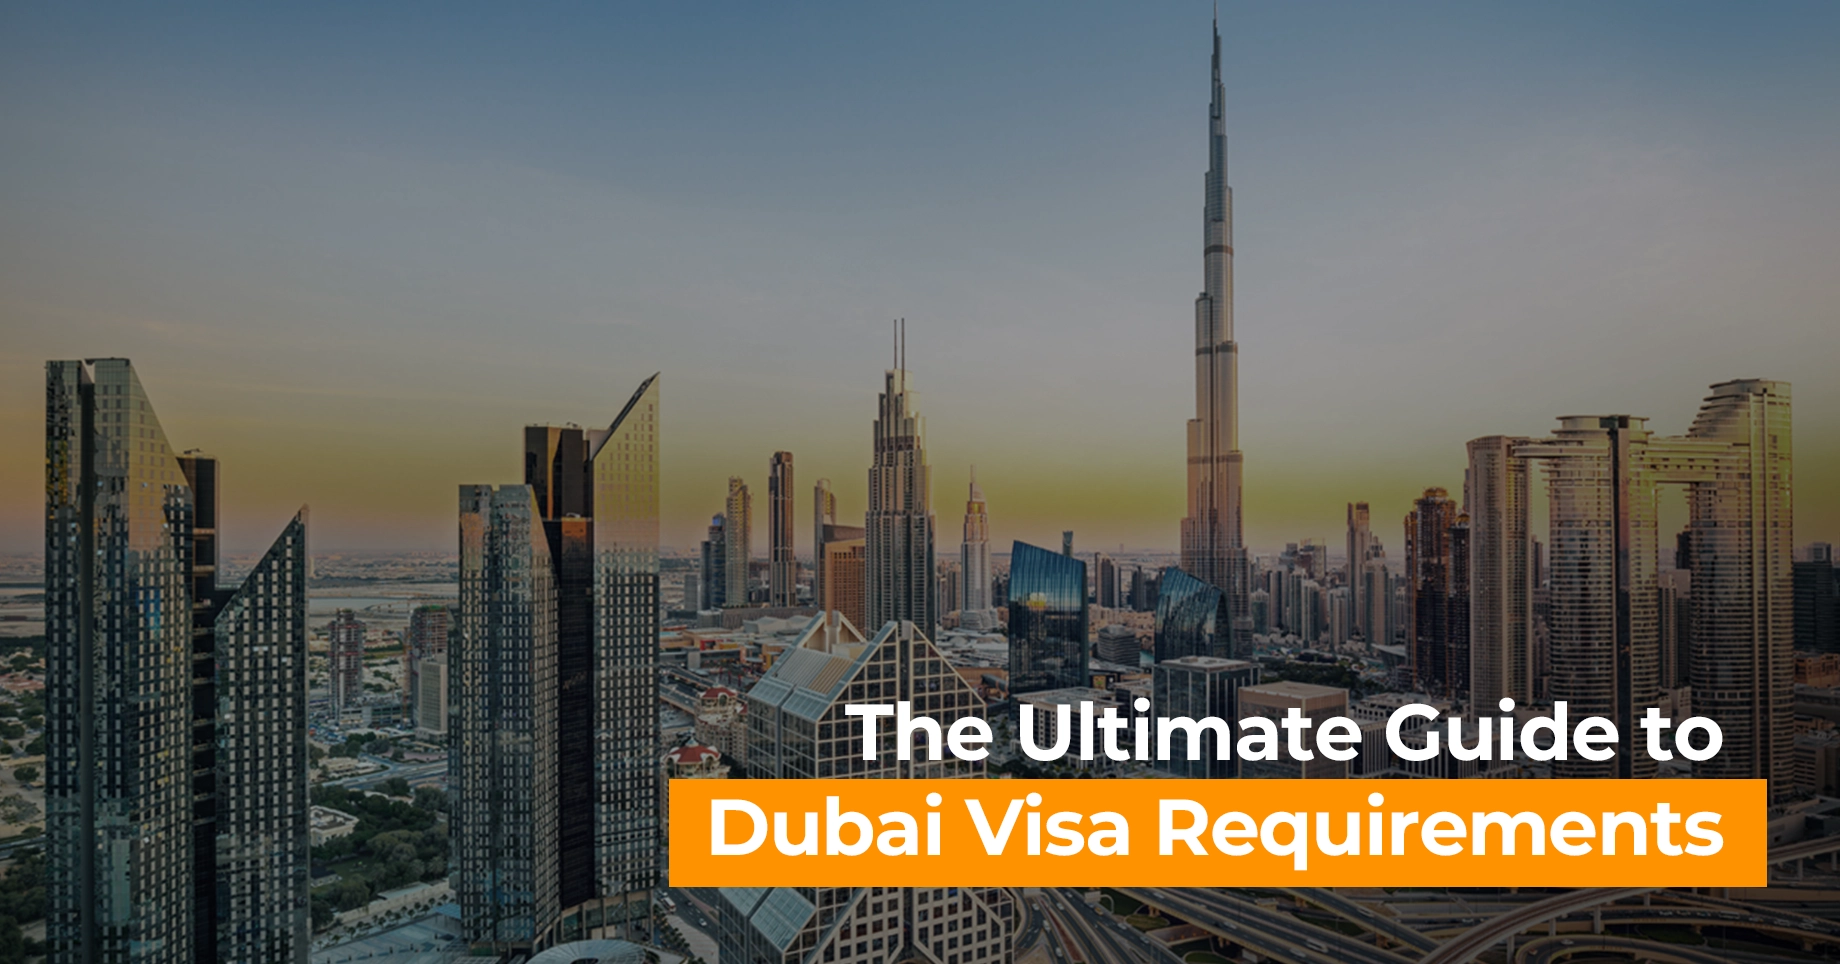 The Ultimate Guide to Dubai Visa Requirements